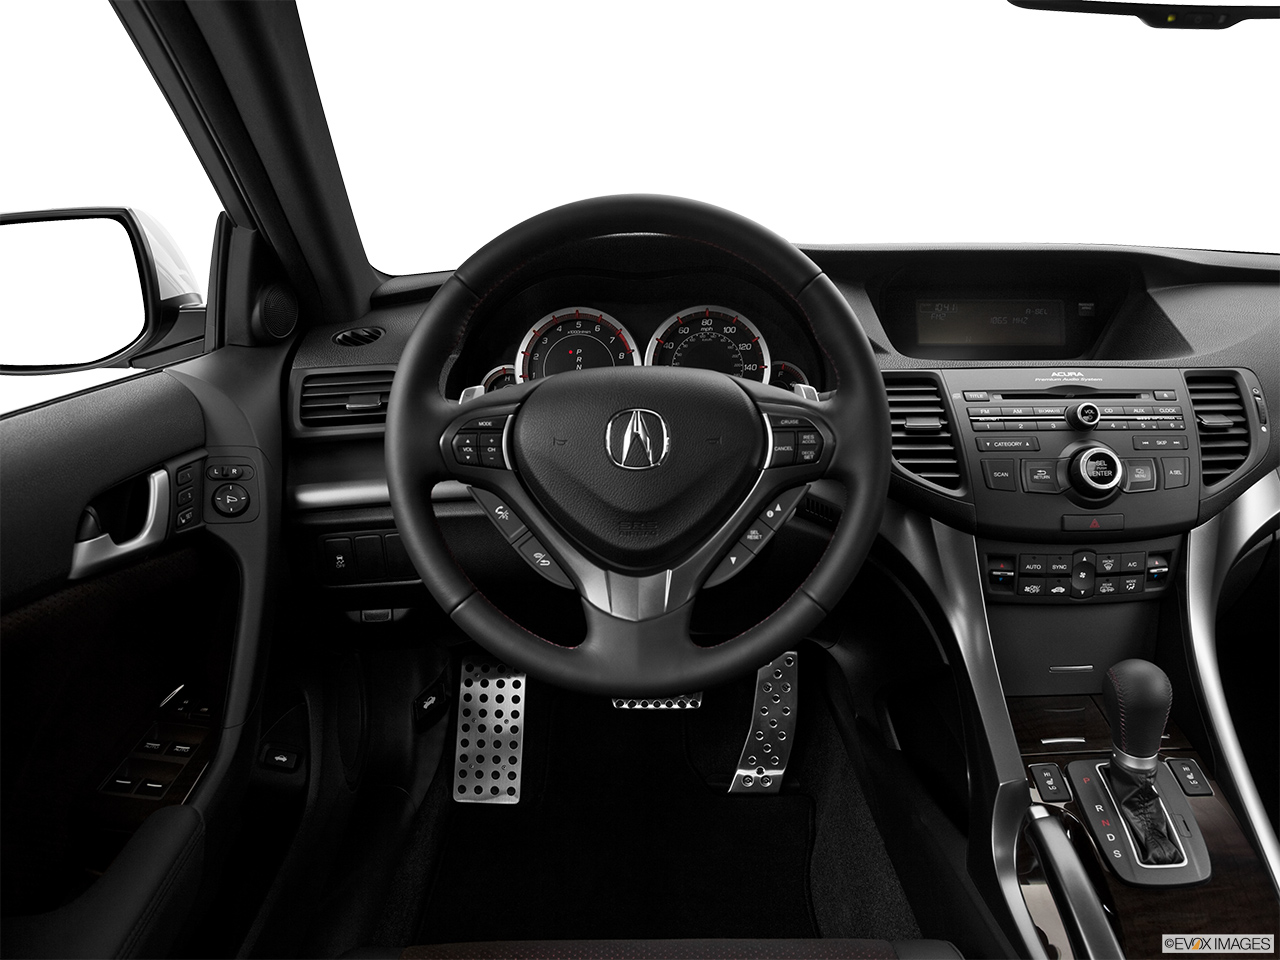 2013 Acura TSX Special Edition 5-Speed Automatic Steering wheel/Center Console. 